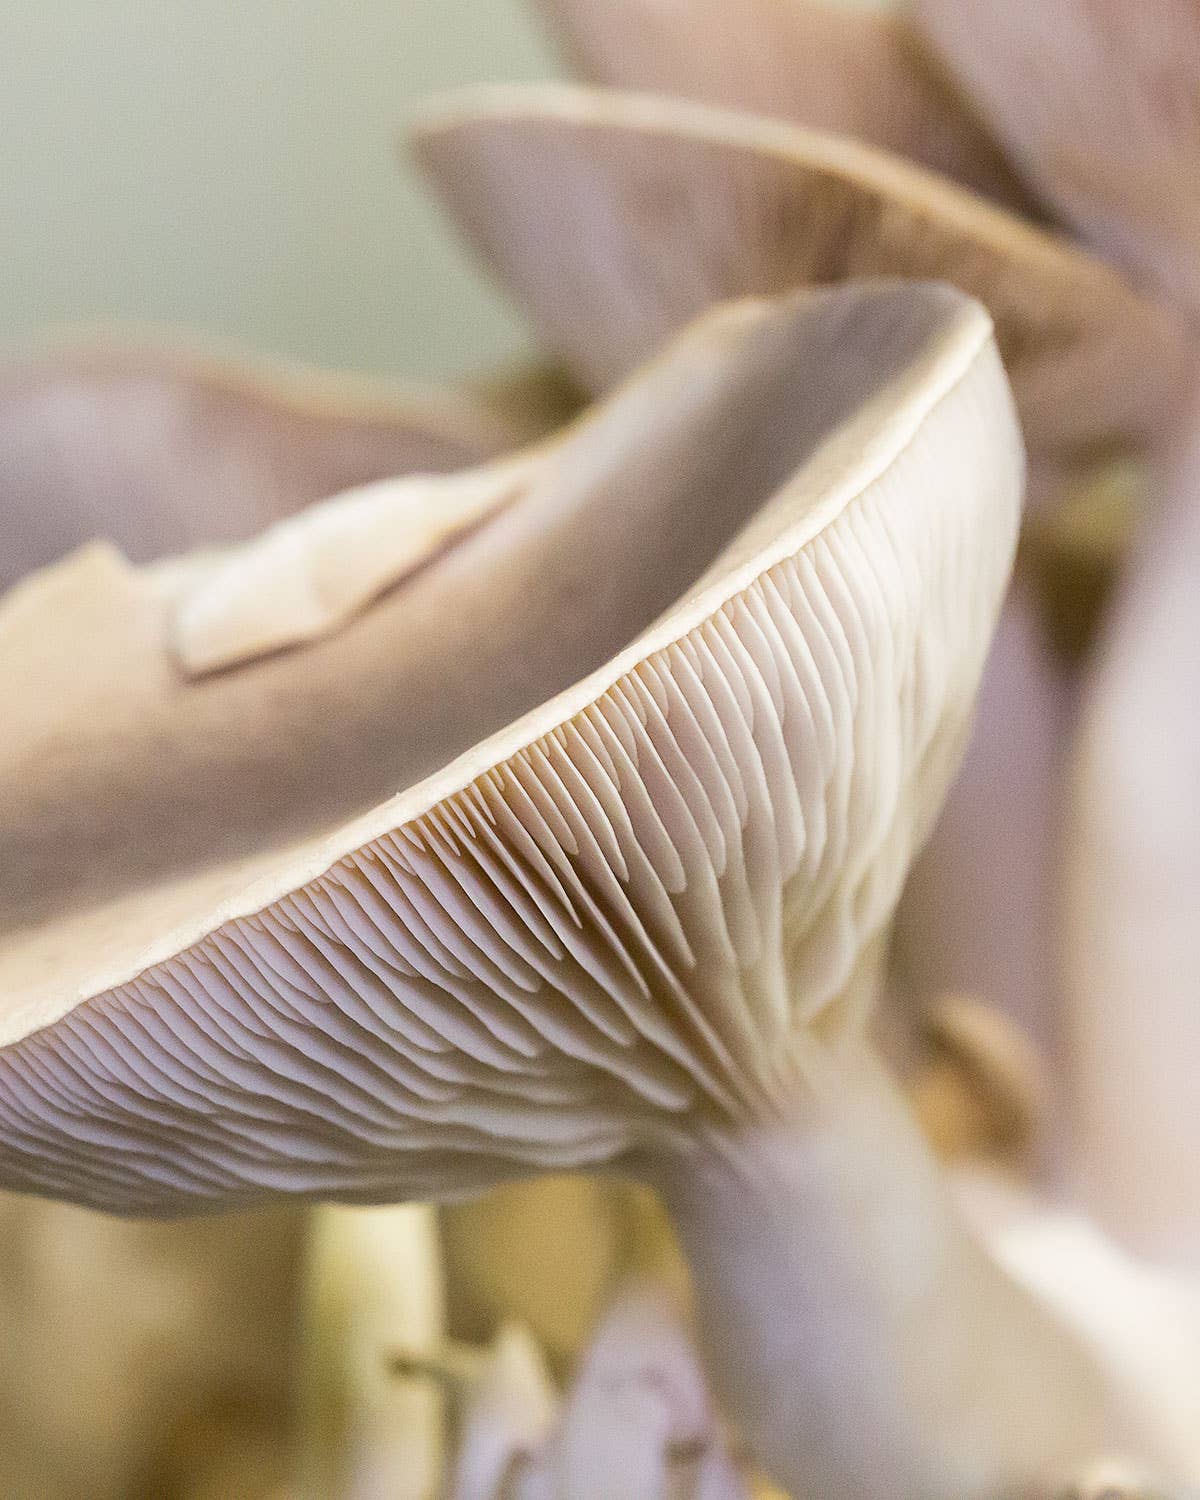 A Trip to the Alien Planet That Grows America’s Mushrooms